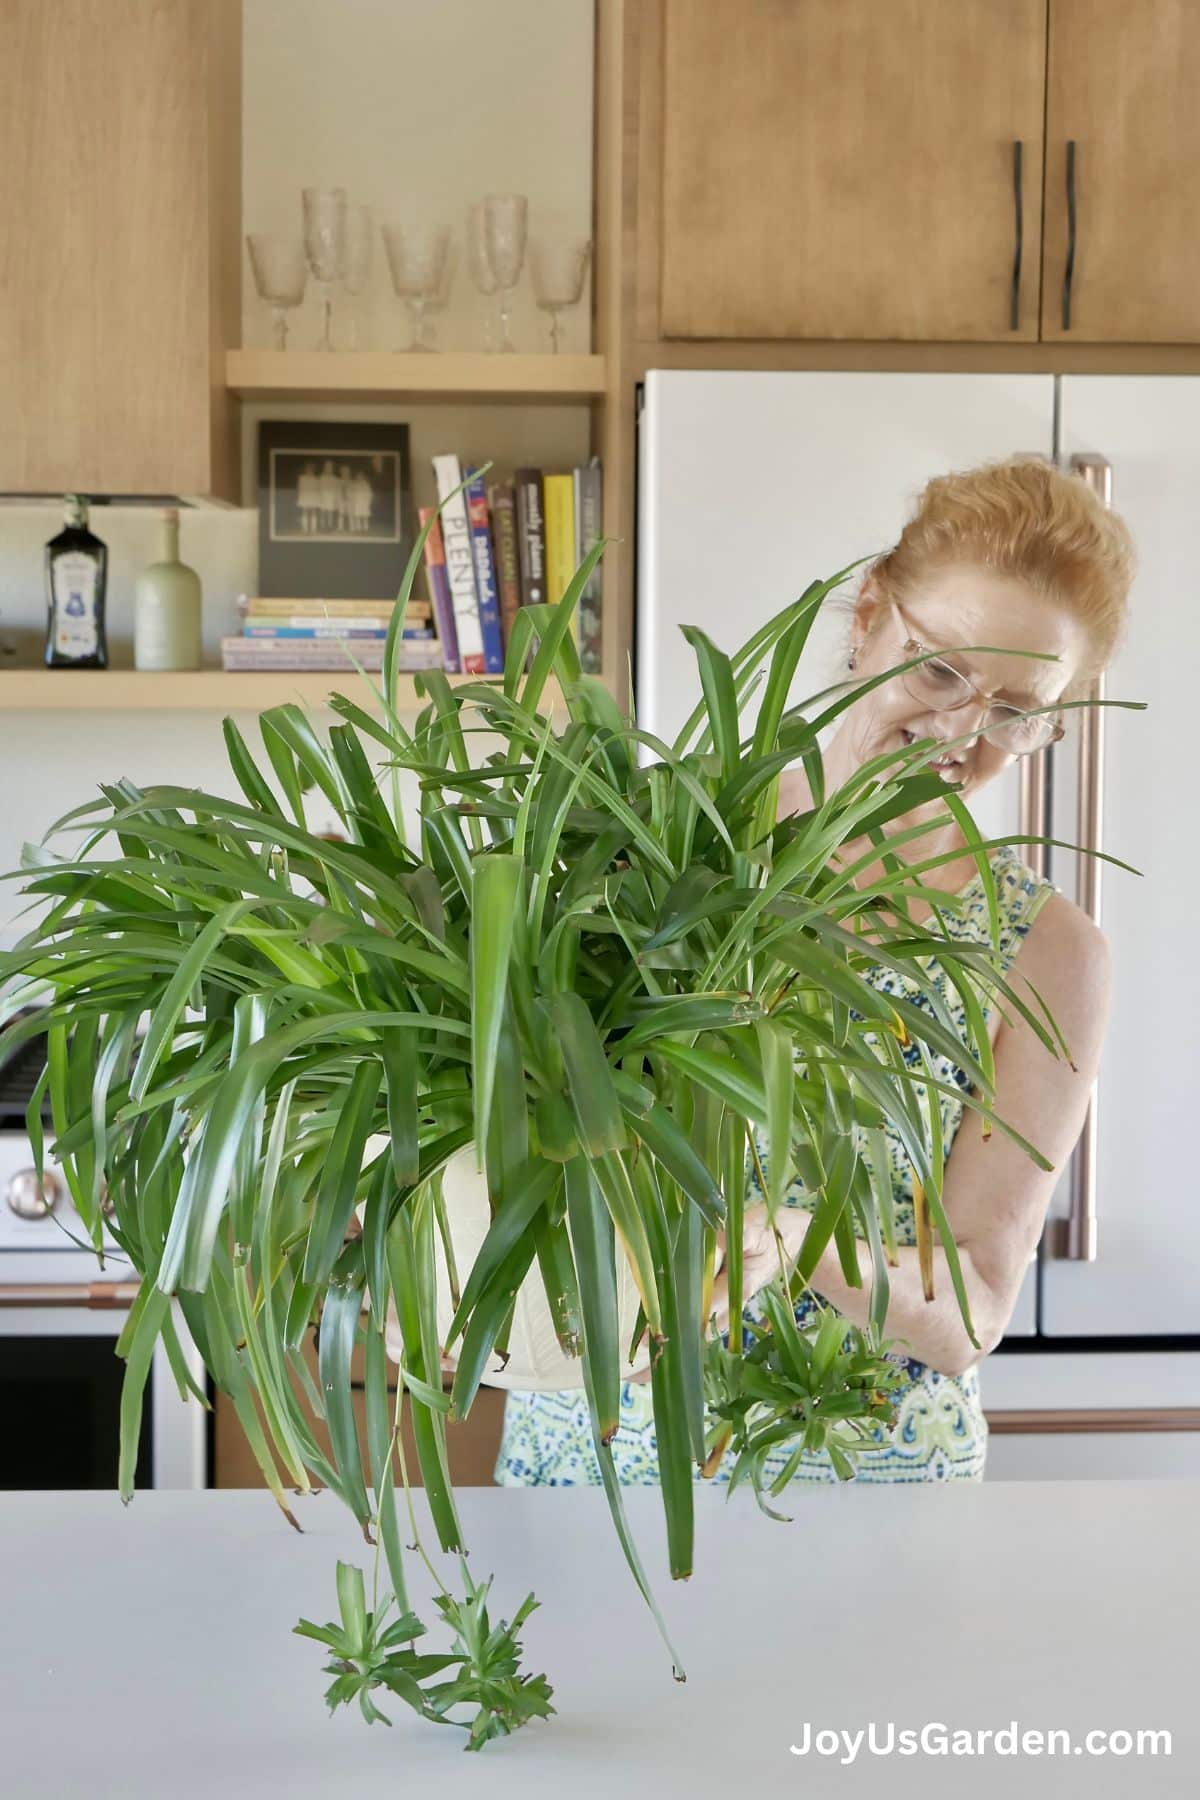 Nell foster holds a spider plant that has been growing indoors and has produced babies. 